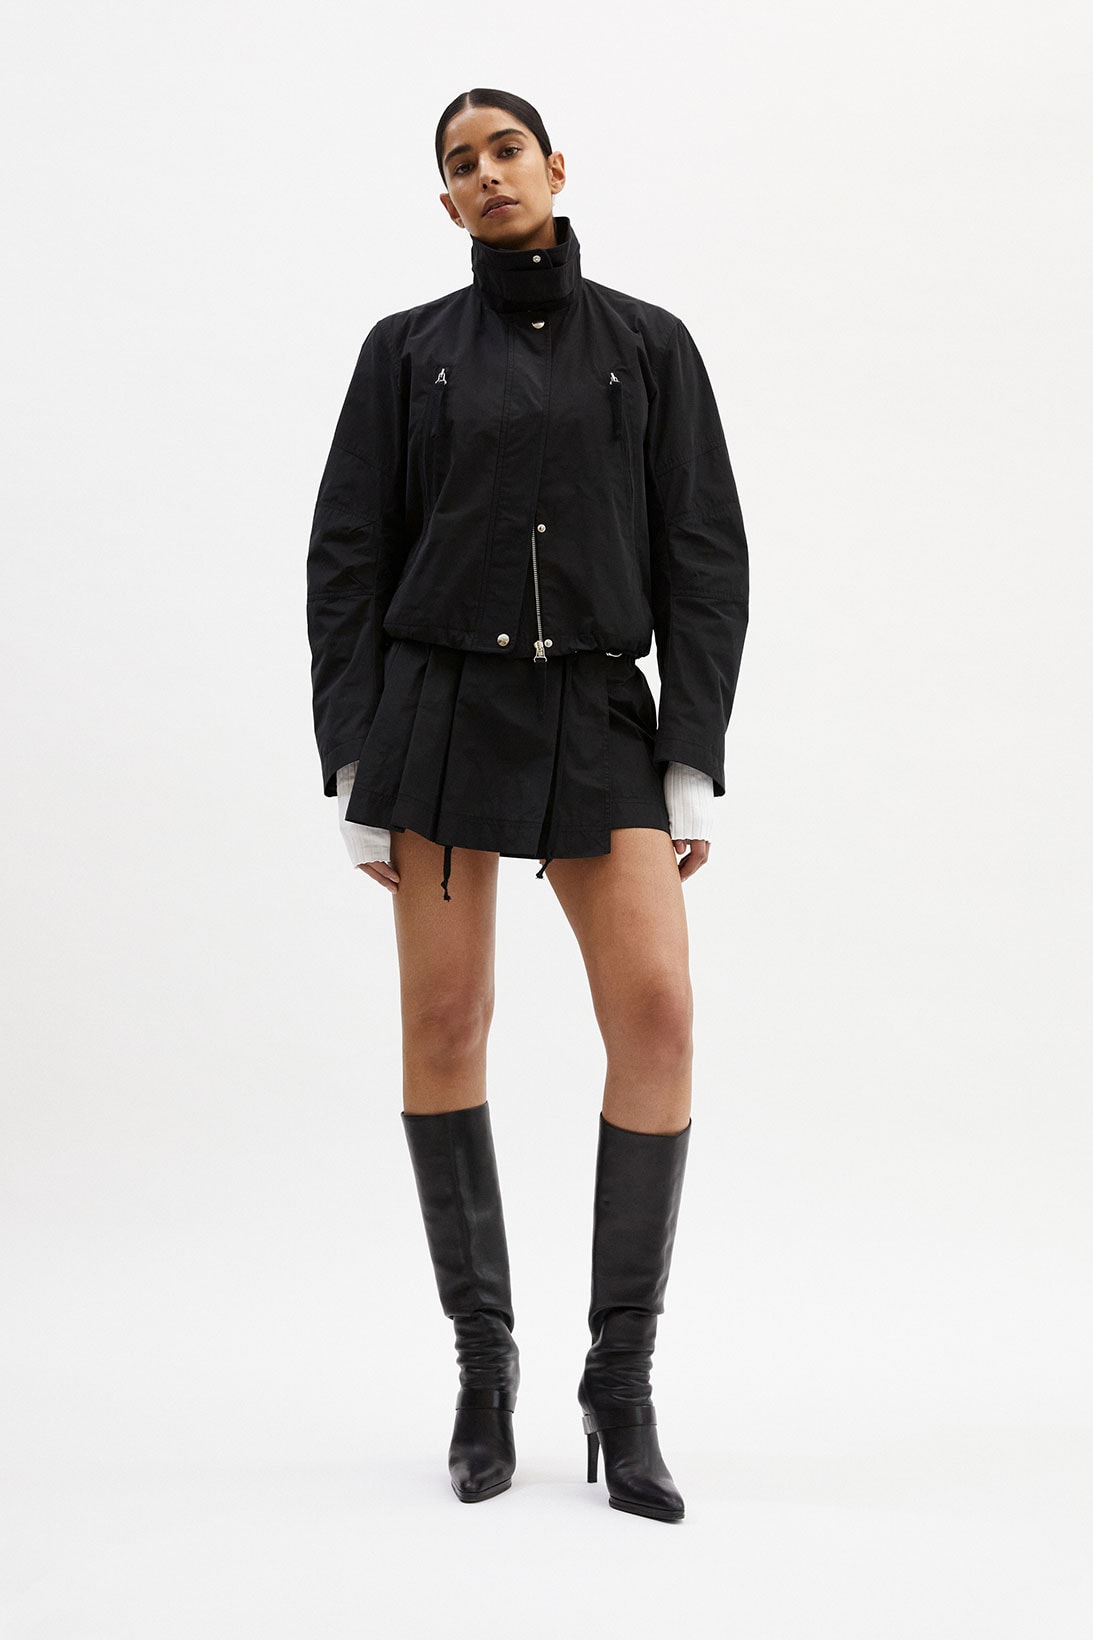 helmut lang fall winter 2021 fw21 collection lookbook black jacket pleated skirt boots